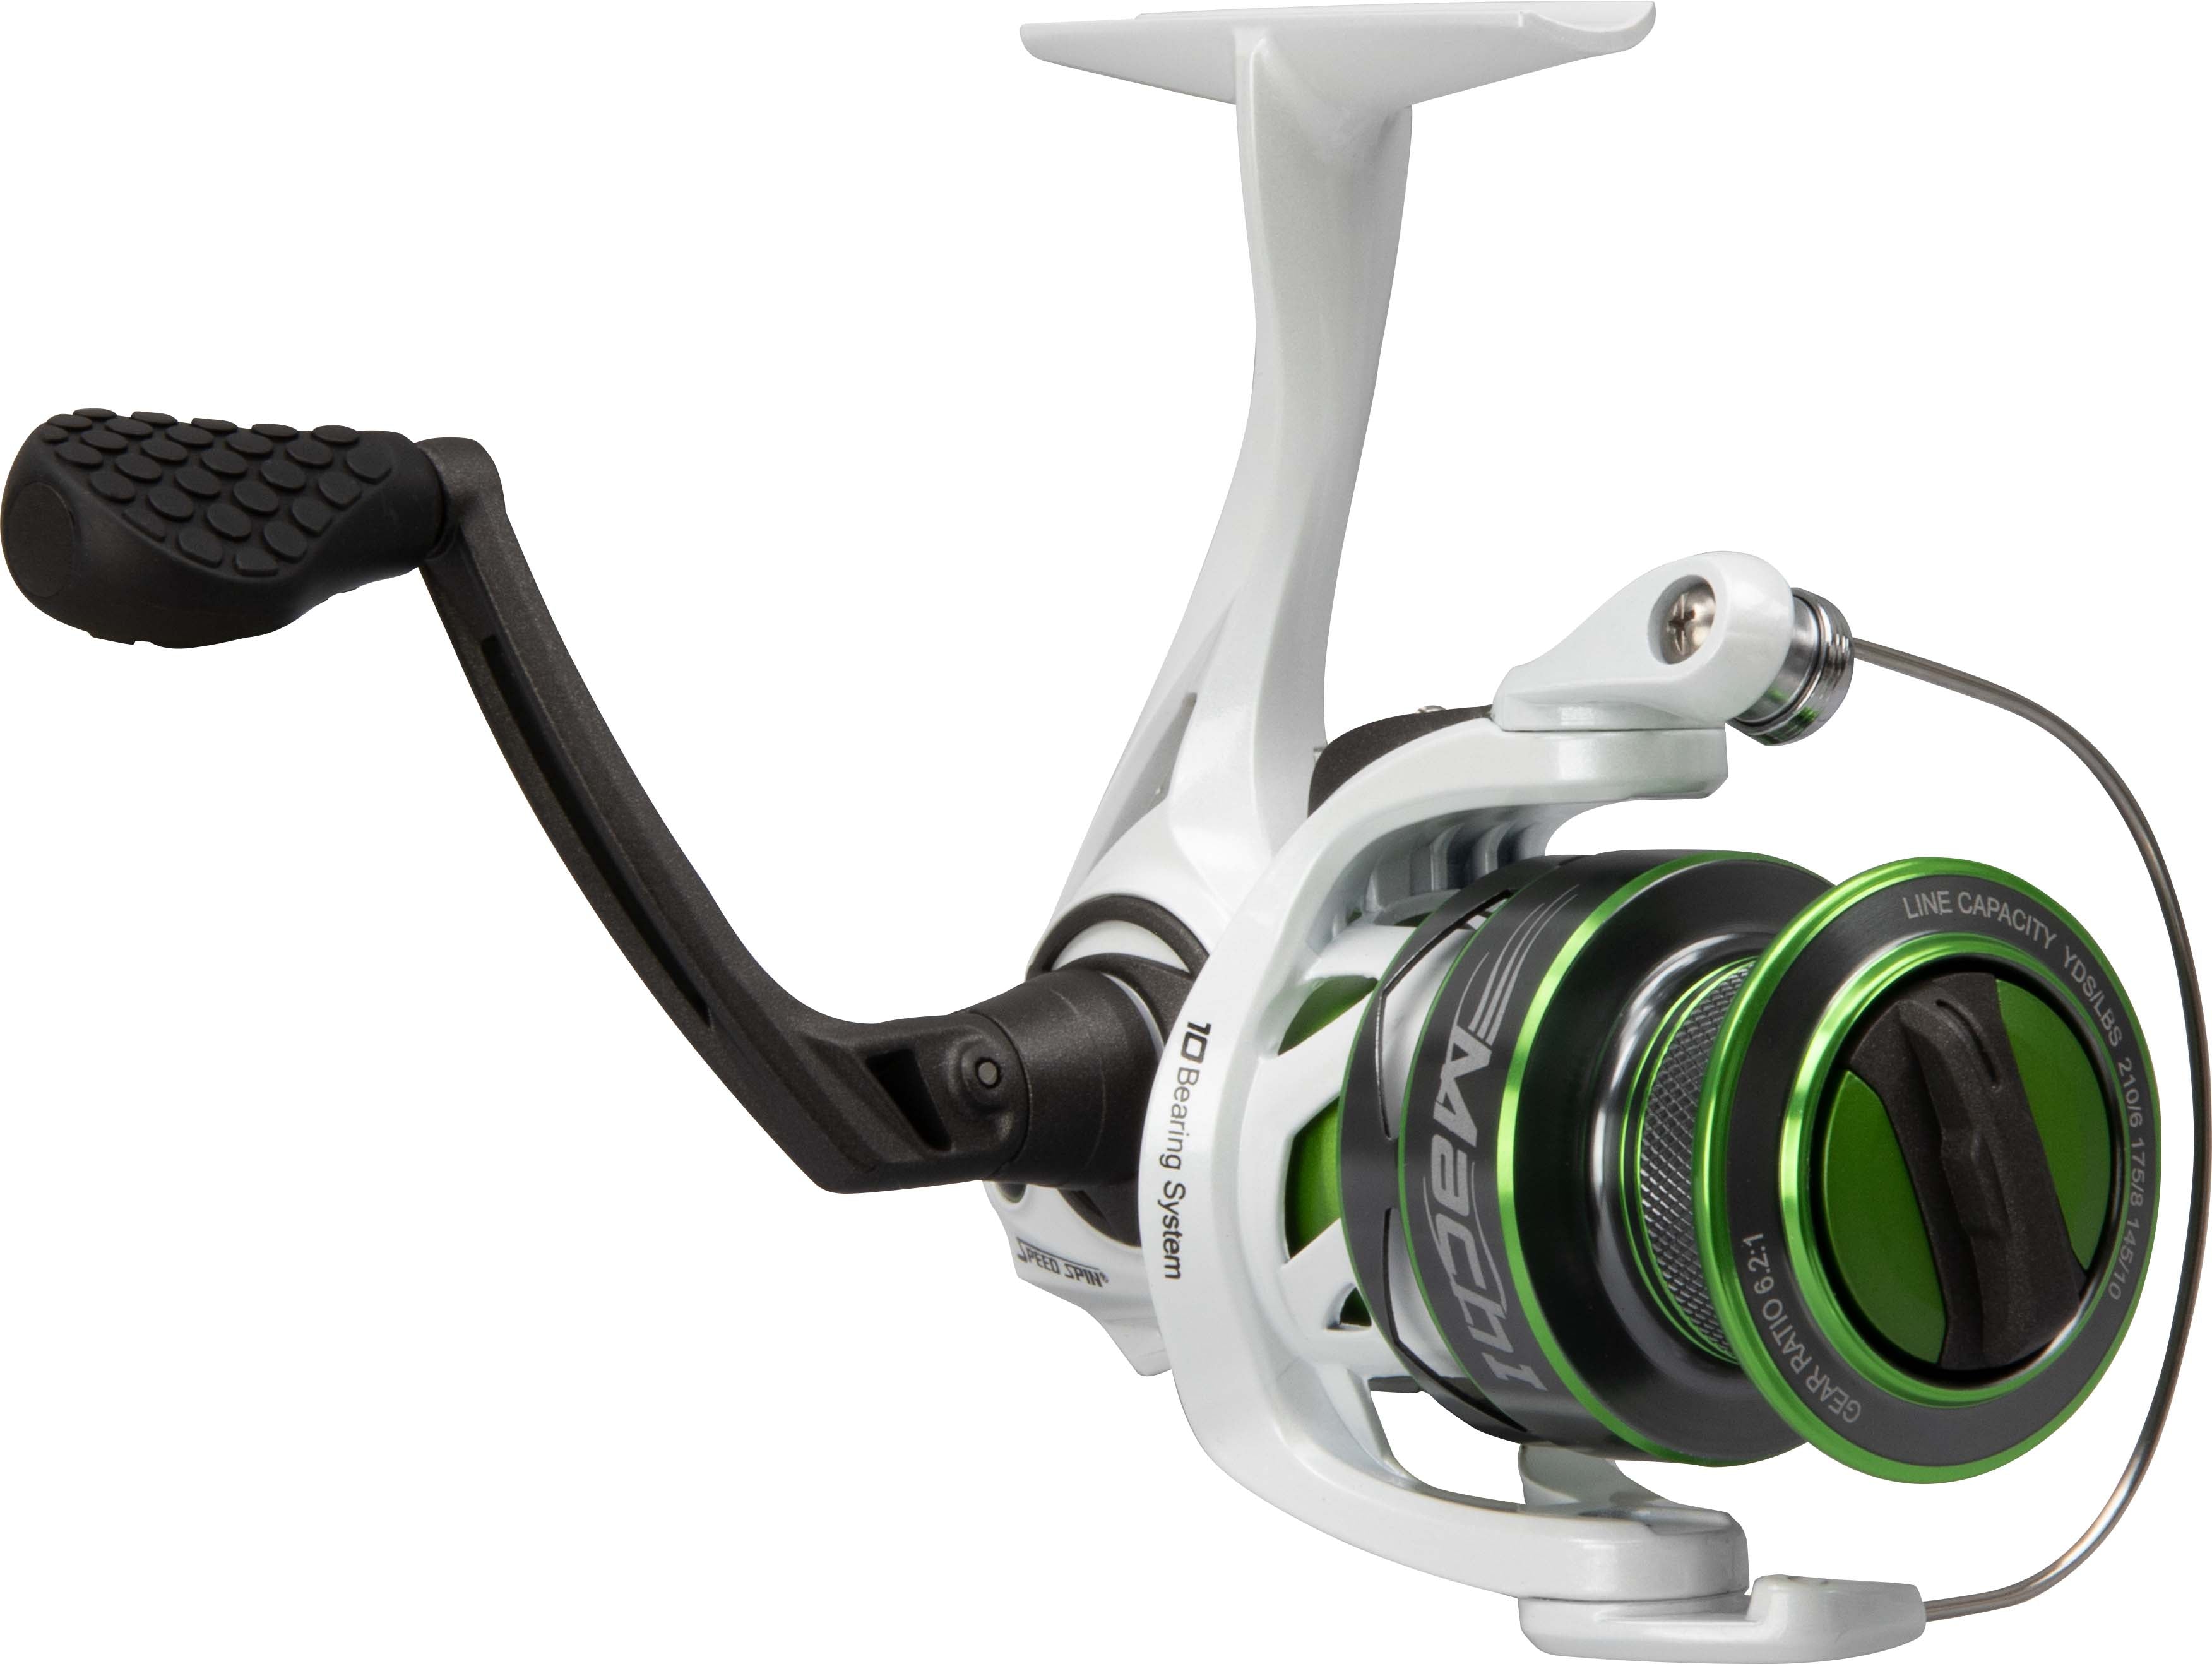 RED WOLF 100 SERIES SPINNING REEL